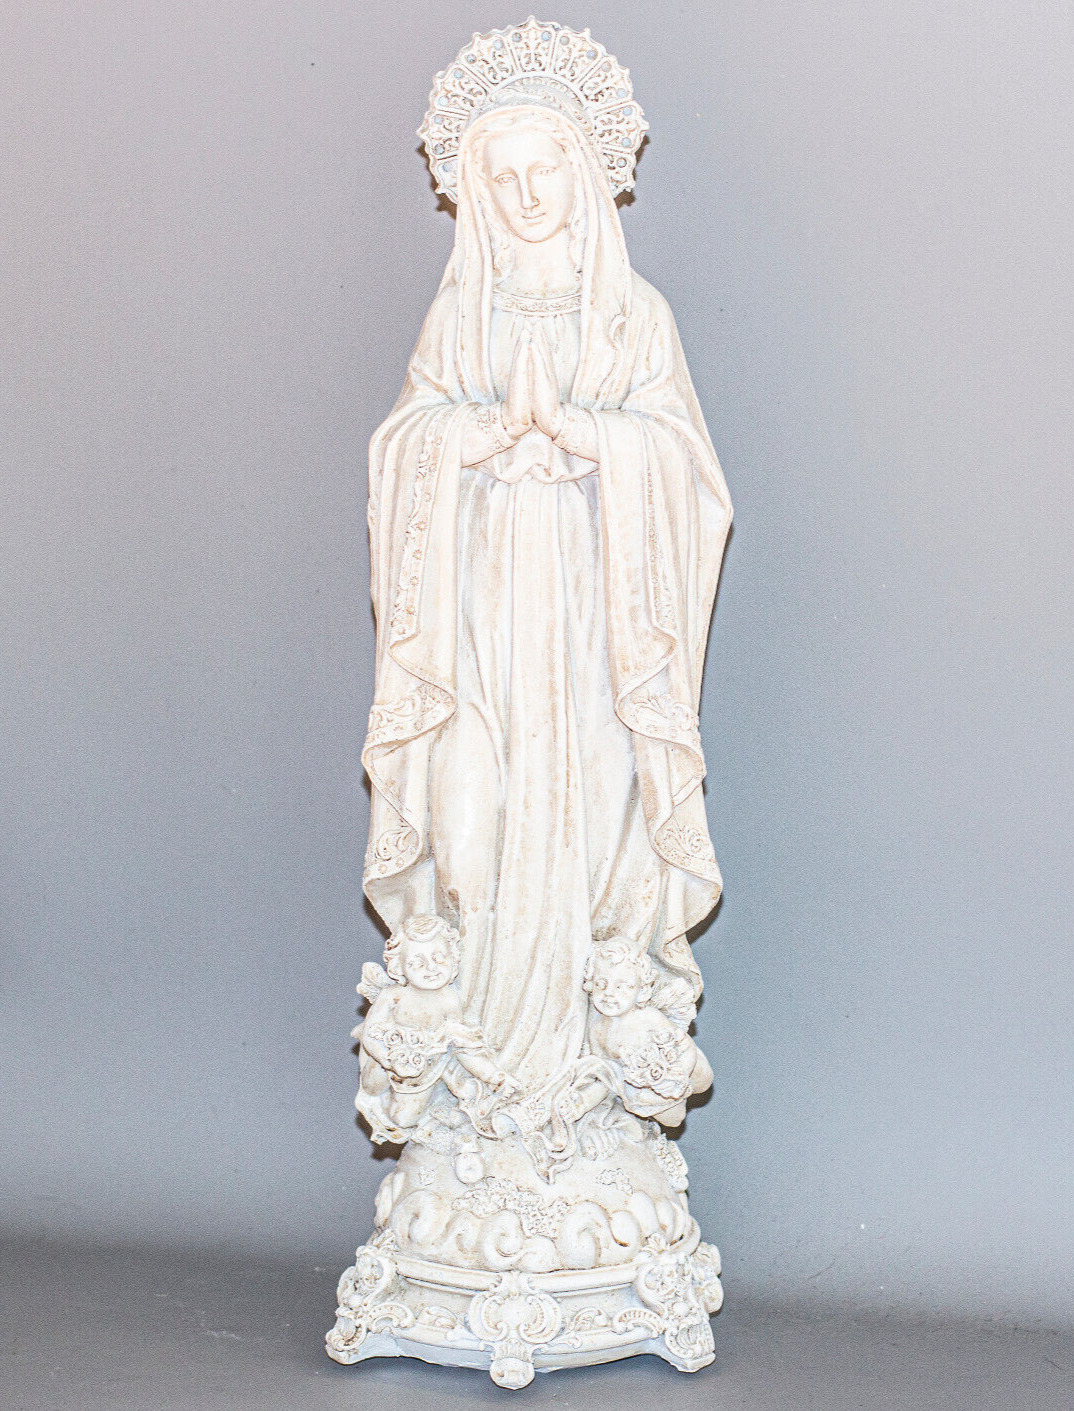 Holy Mother Statue Our Lady Religious Chtistian Decor Virgin Mary Devotional Art